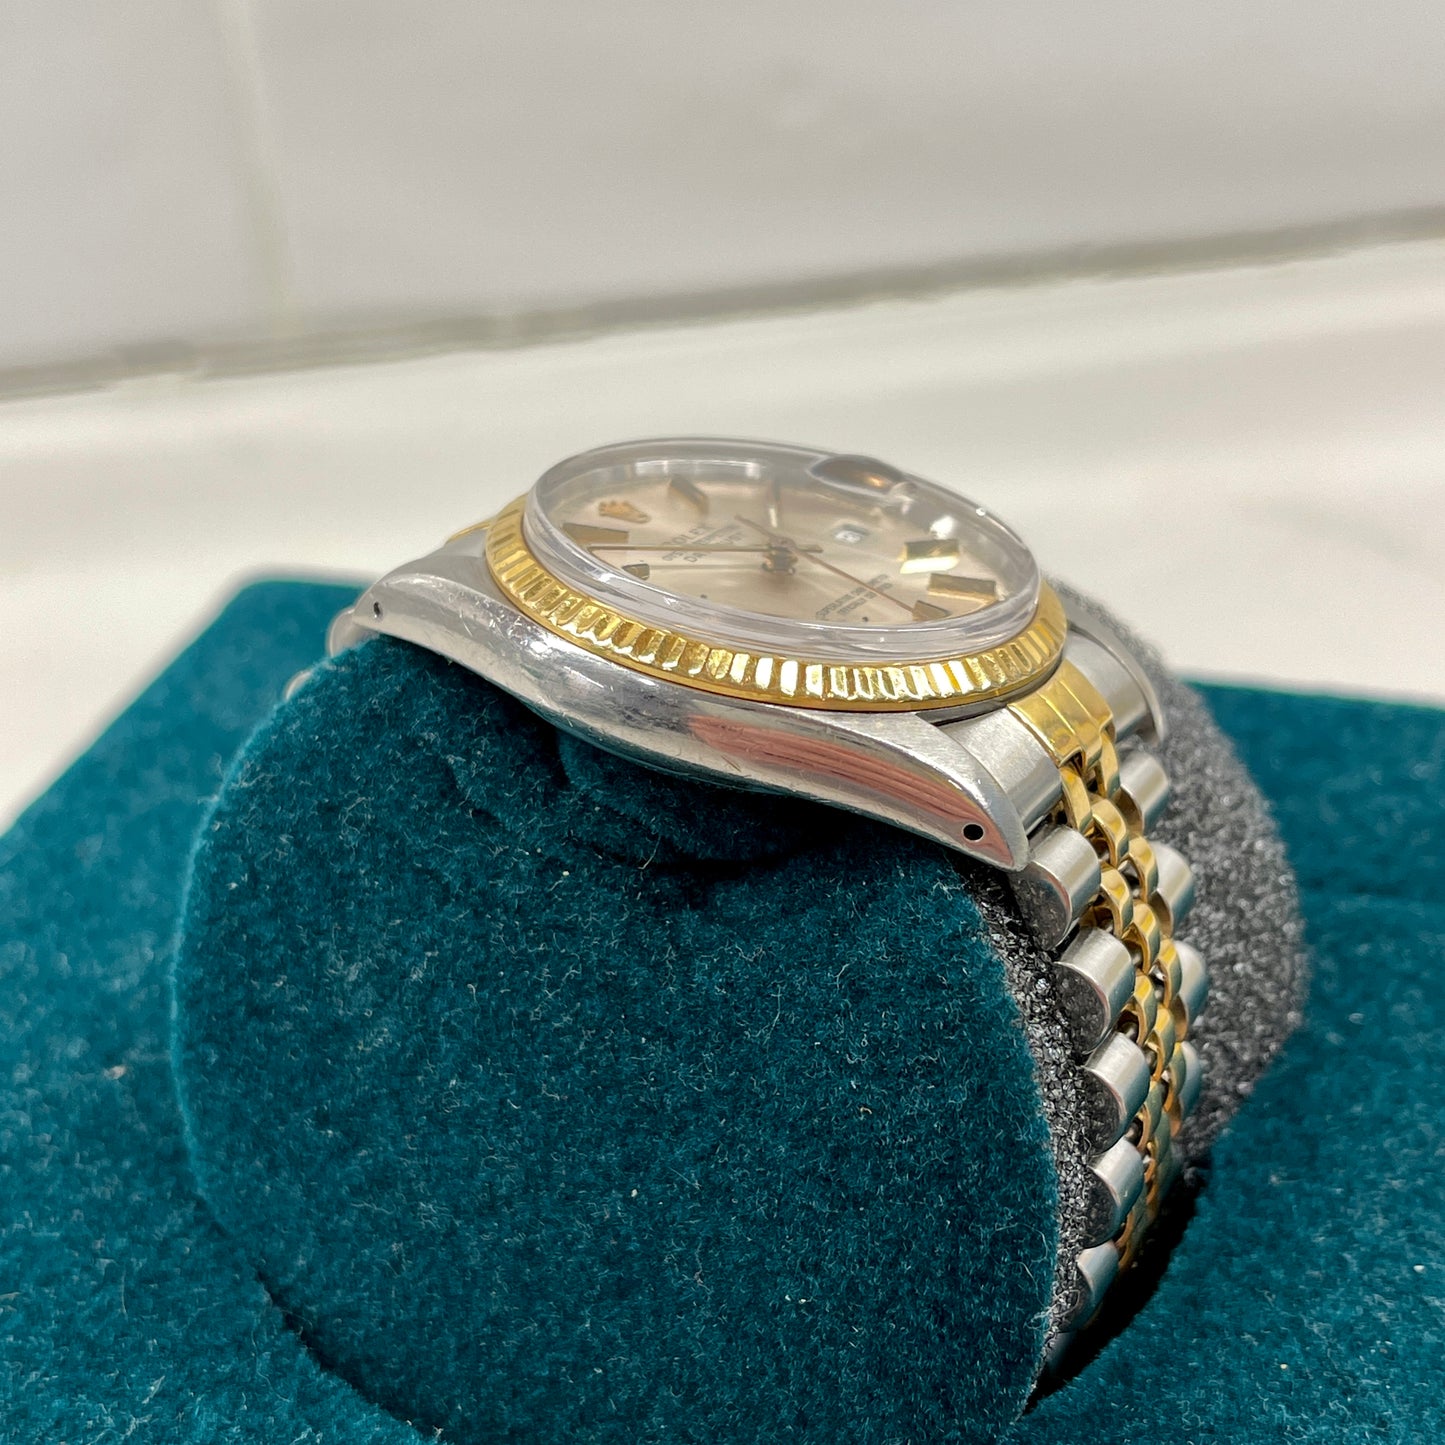 1985 Vintage Rolex Datejust 16013 Steel Gold Two Tone Jubilee Cal 3035 Automatic Wristwatch - Hashtag Watch Company